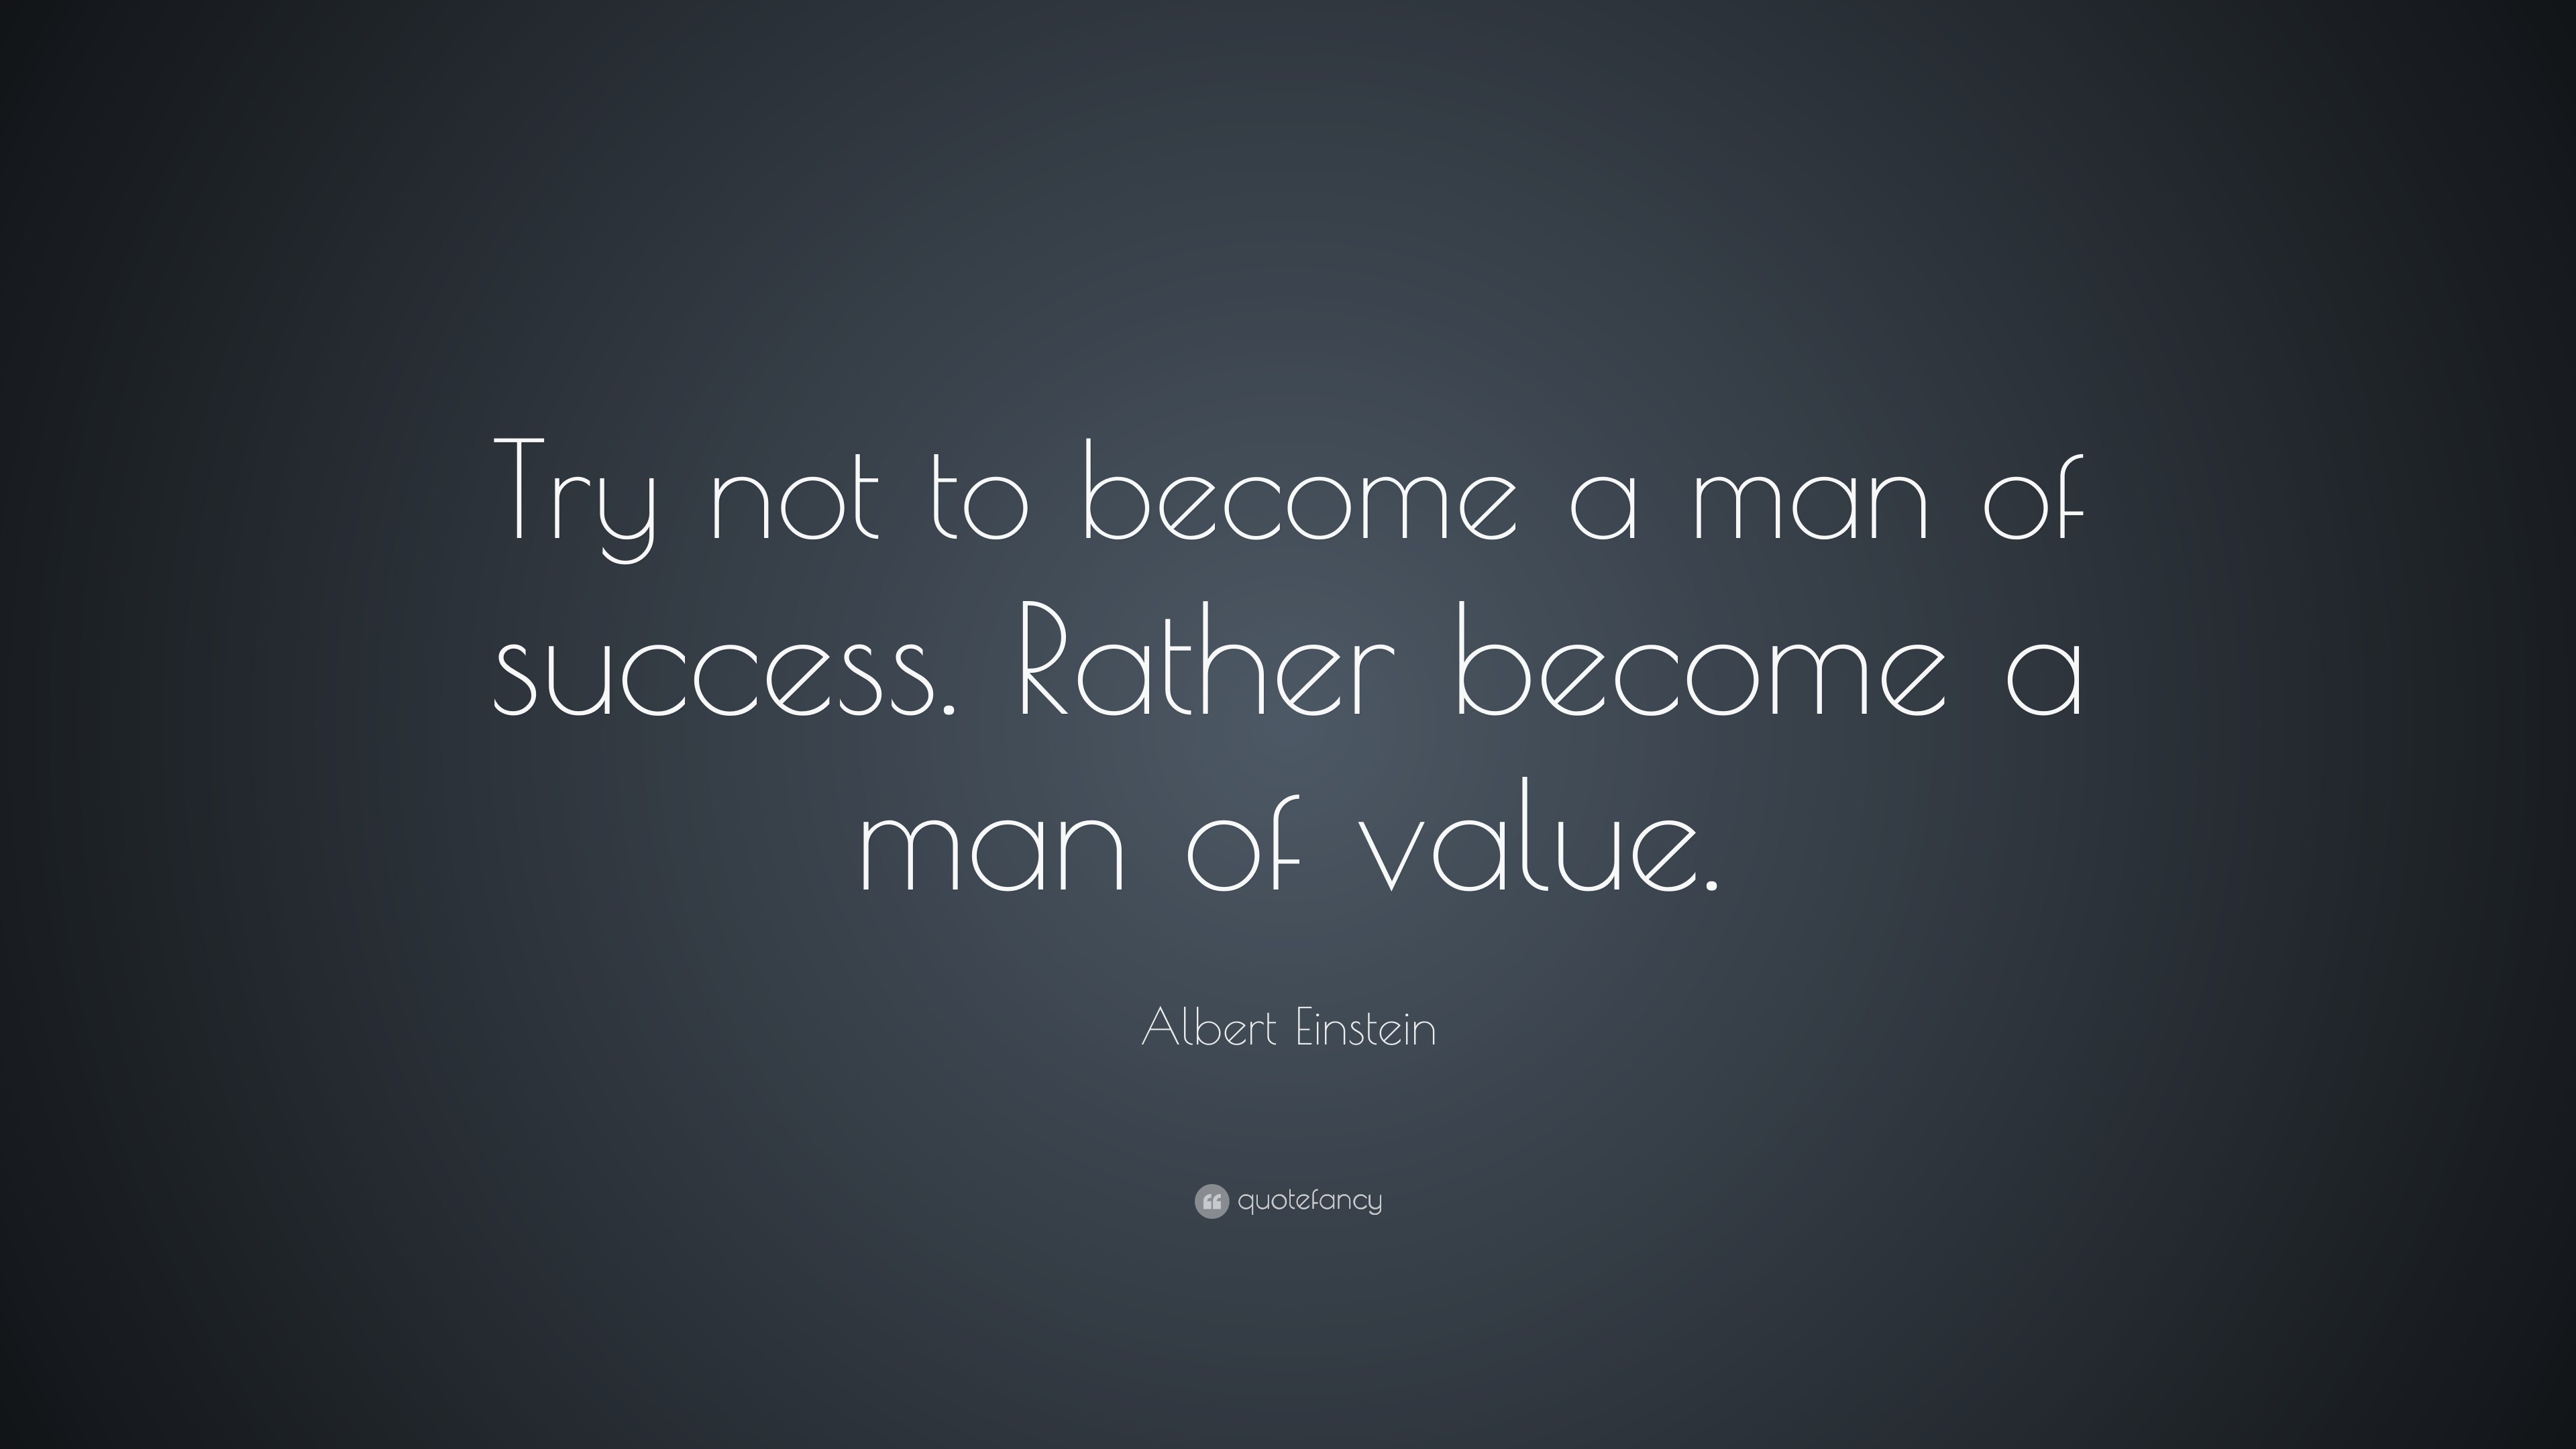 3840x2160 Inspirational Quotes: “Try not to become a man of success. Rather become a